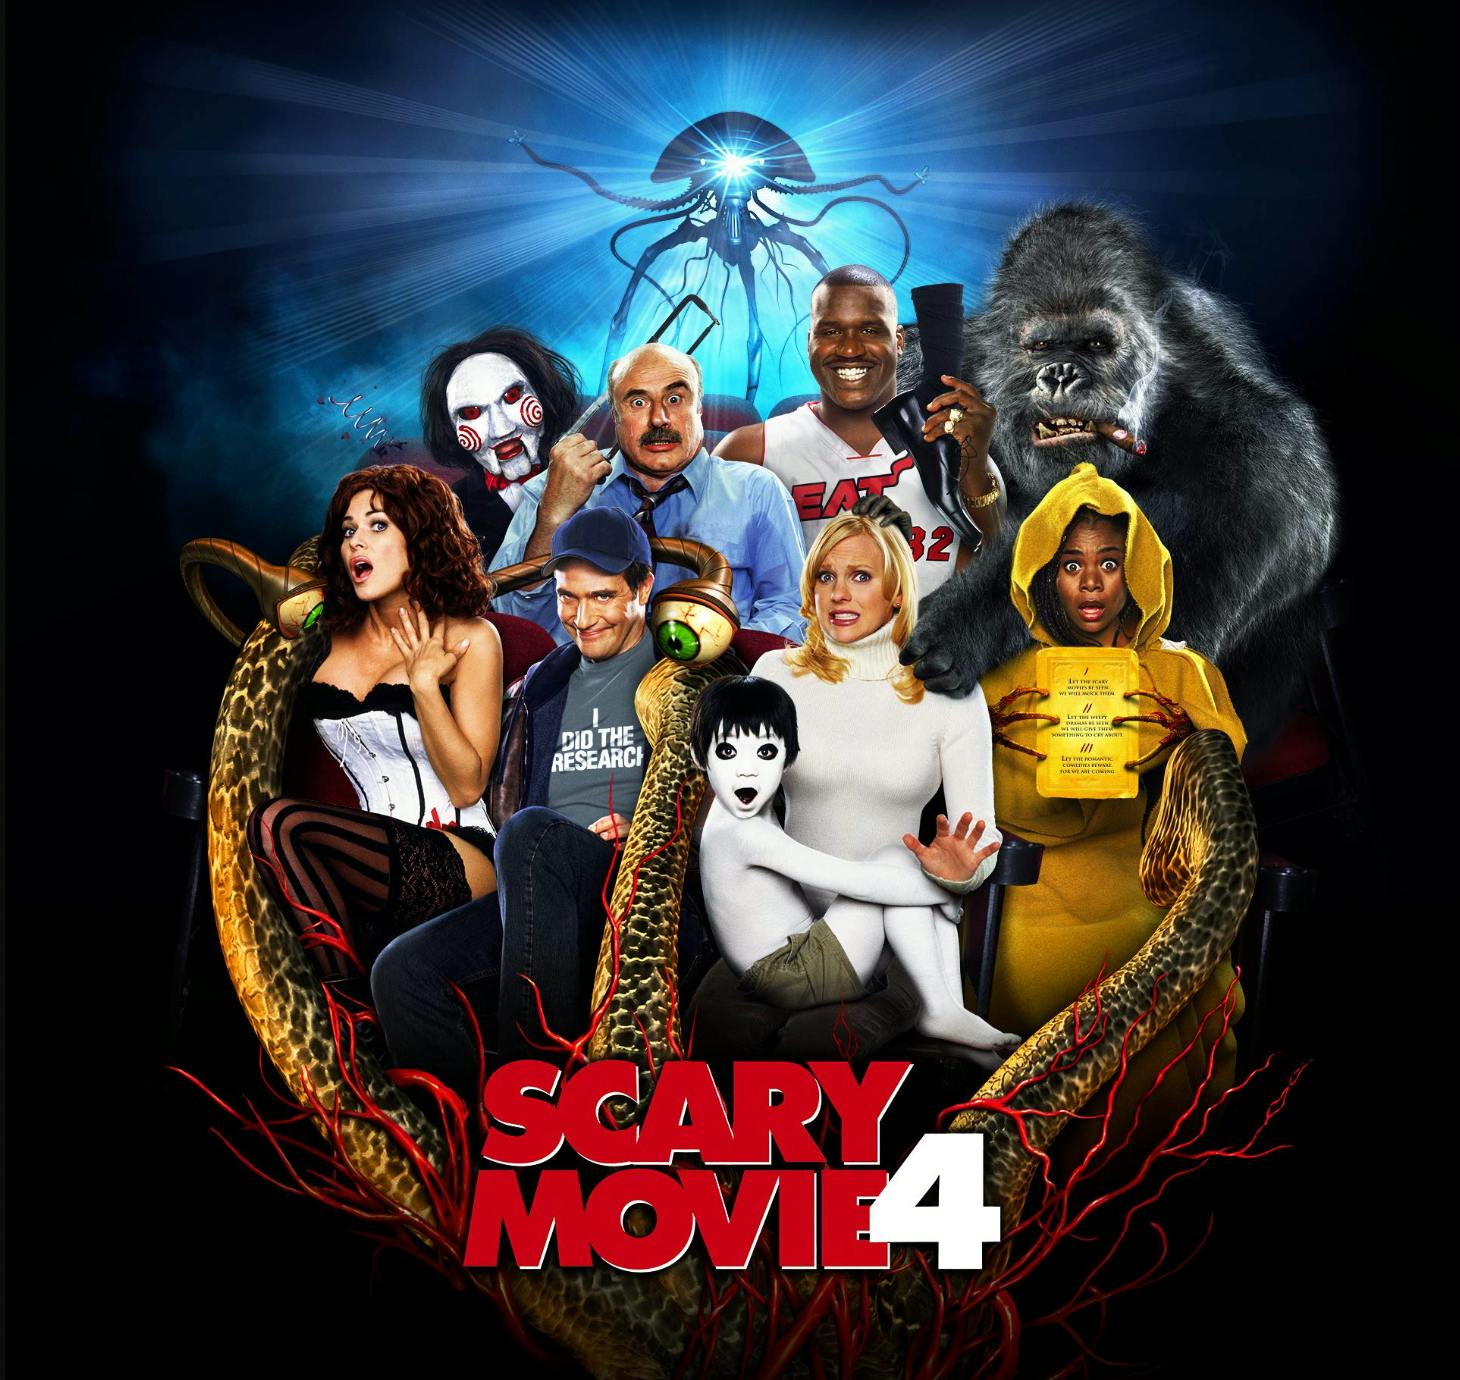 Scary Movie 4 poster art